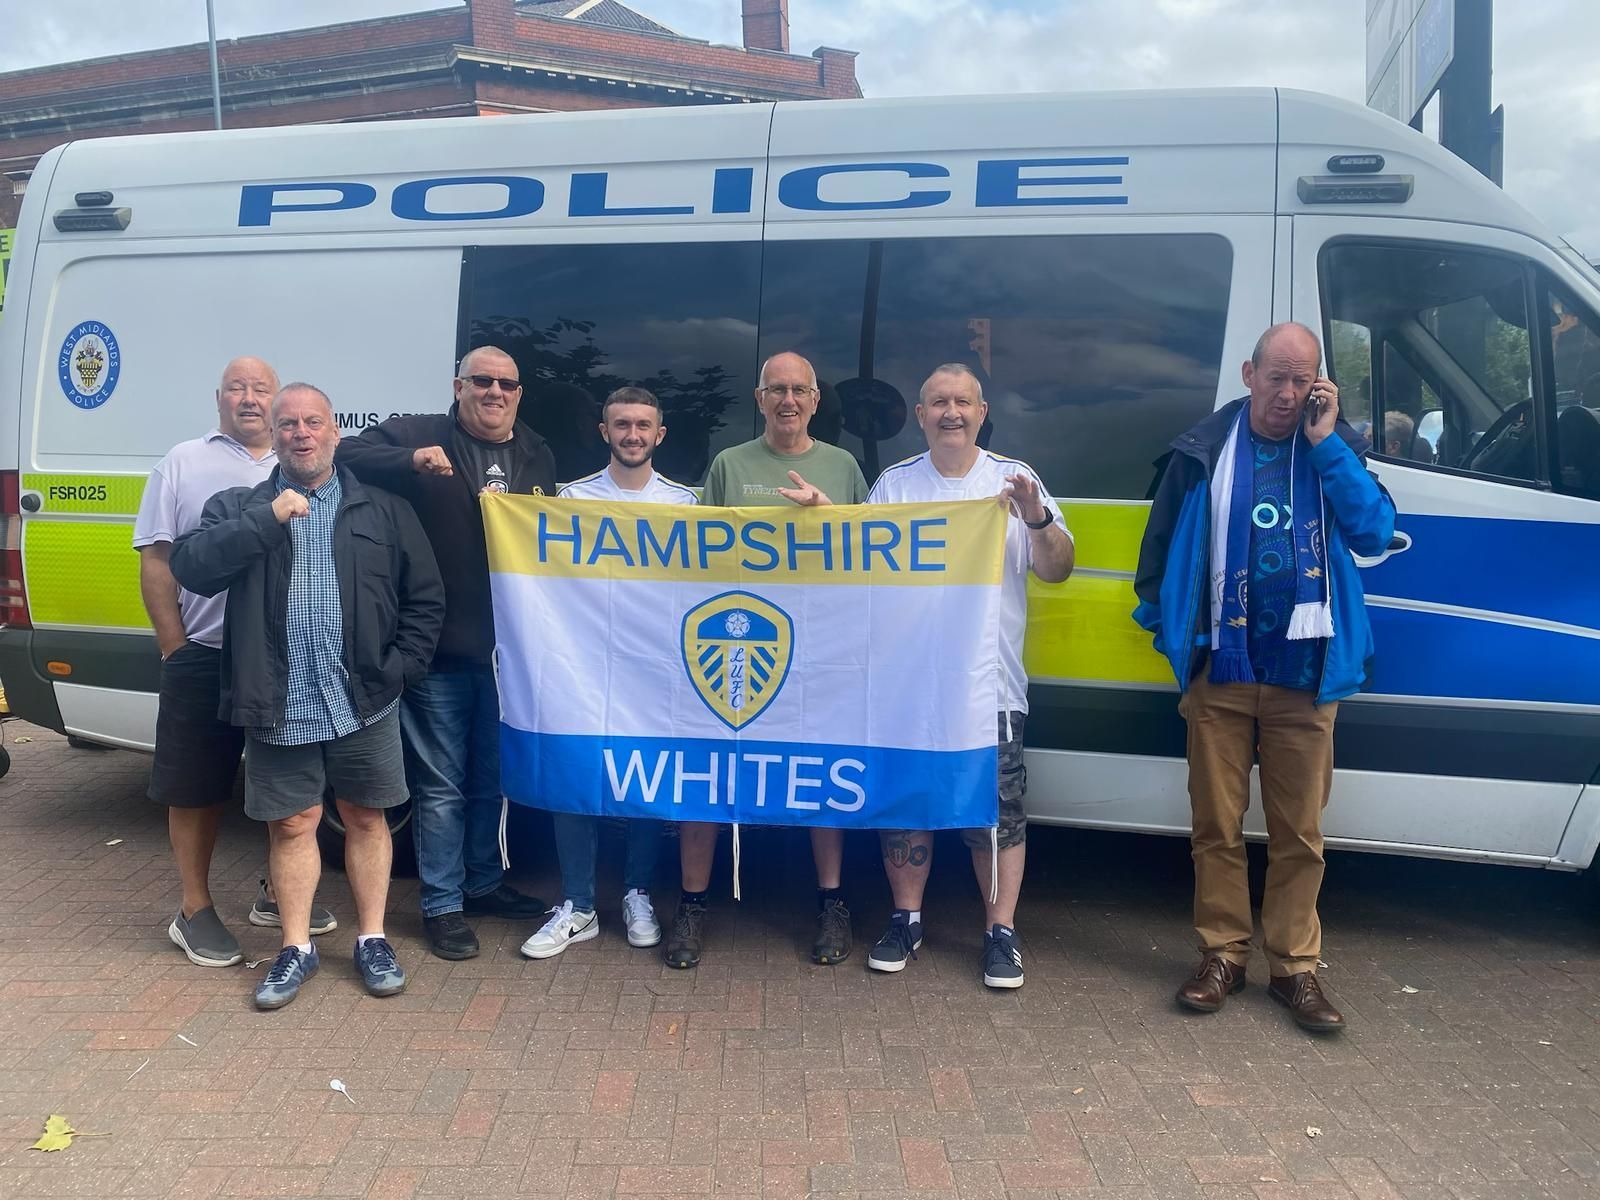 Book tickets with Hampshire Whites